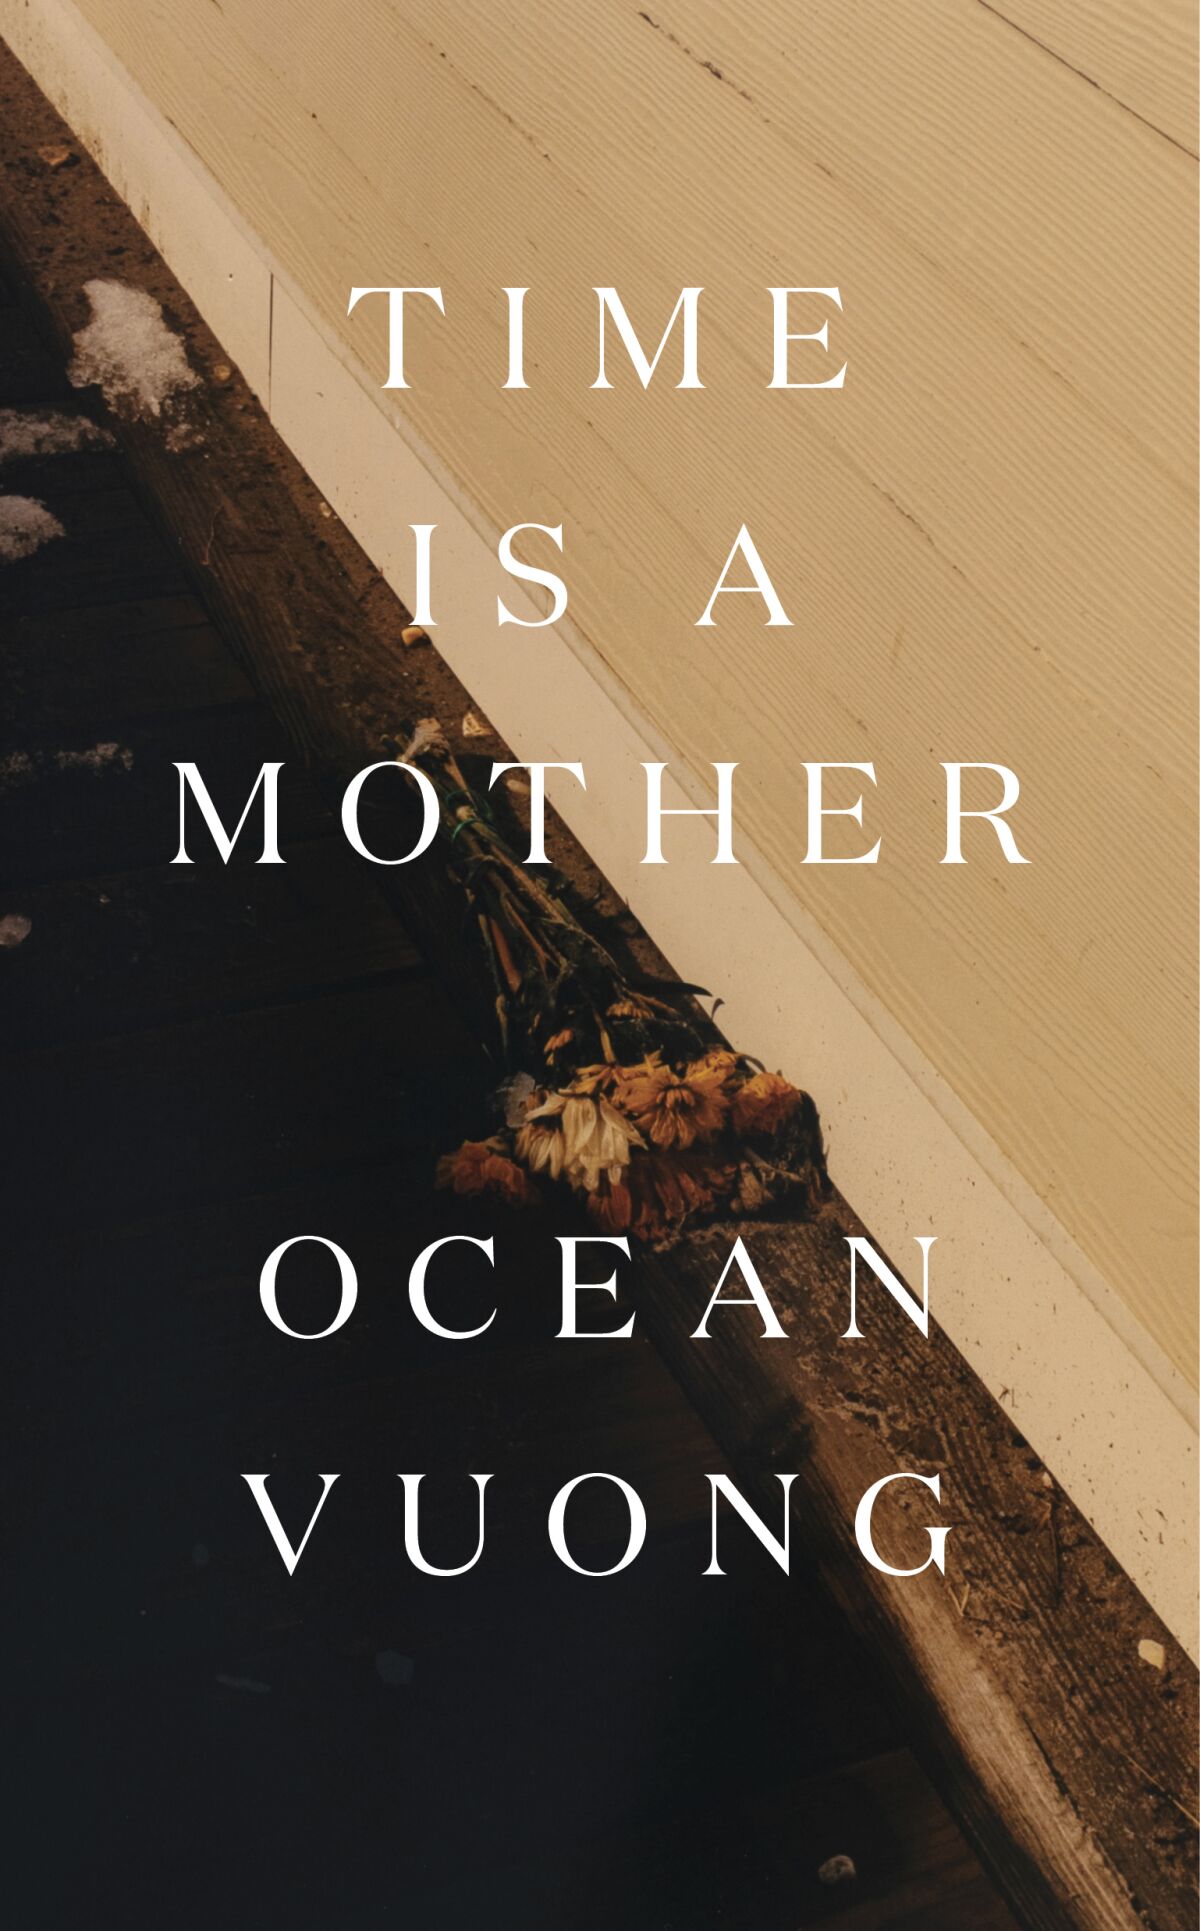 This cover image released by Penguin Press shows "Time is a Mother" by Ocean Vuong. (Penguin Press via AP)